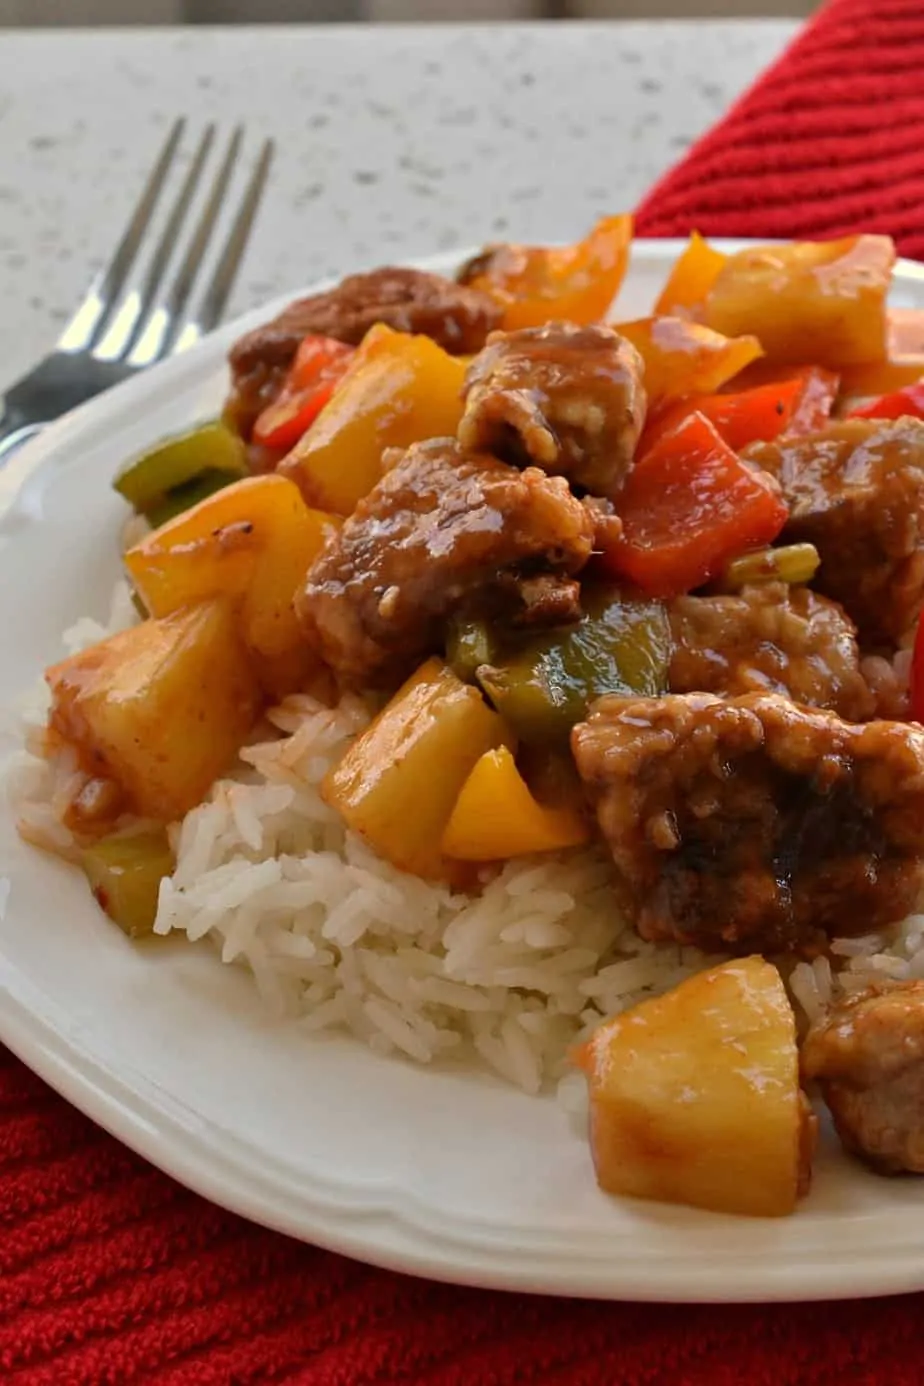 This Sweet Sour Pork brings crispy fried pork together with garlic, celery, sweet bell peppers and pineapple. 